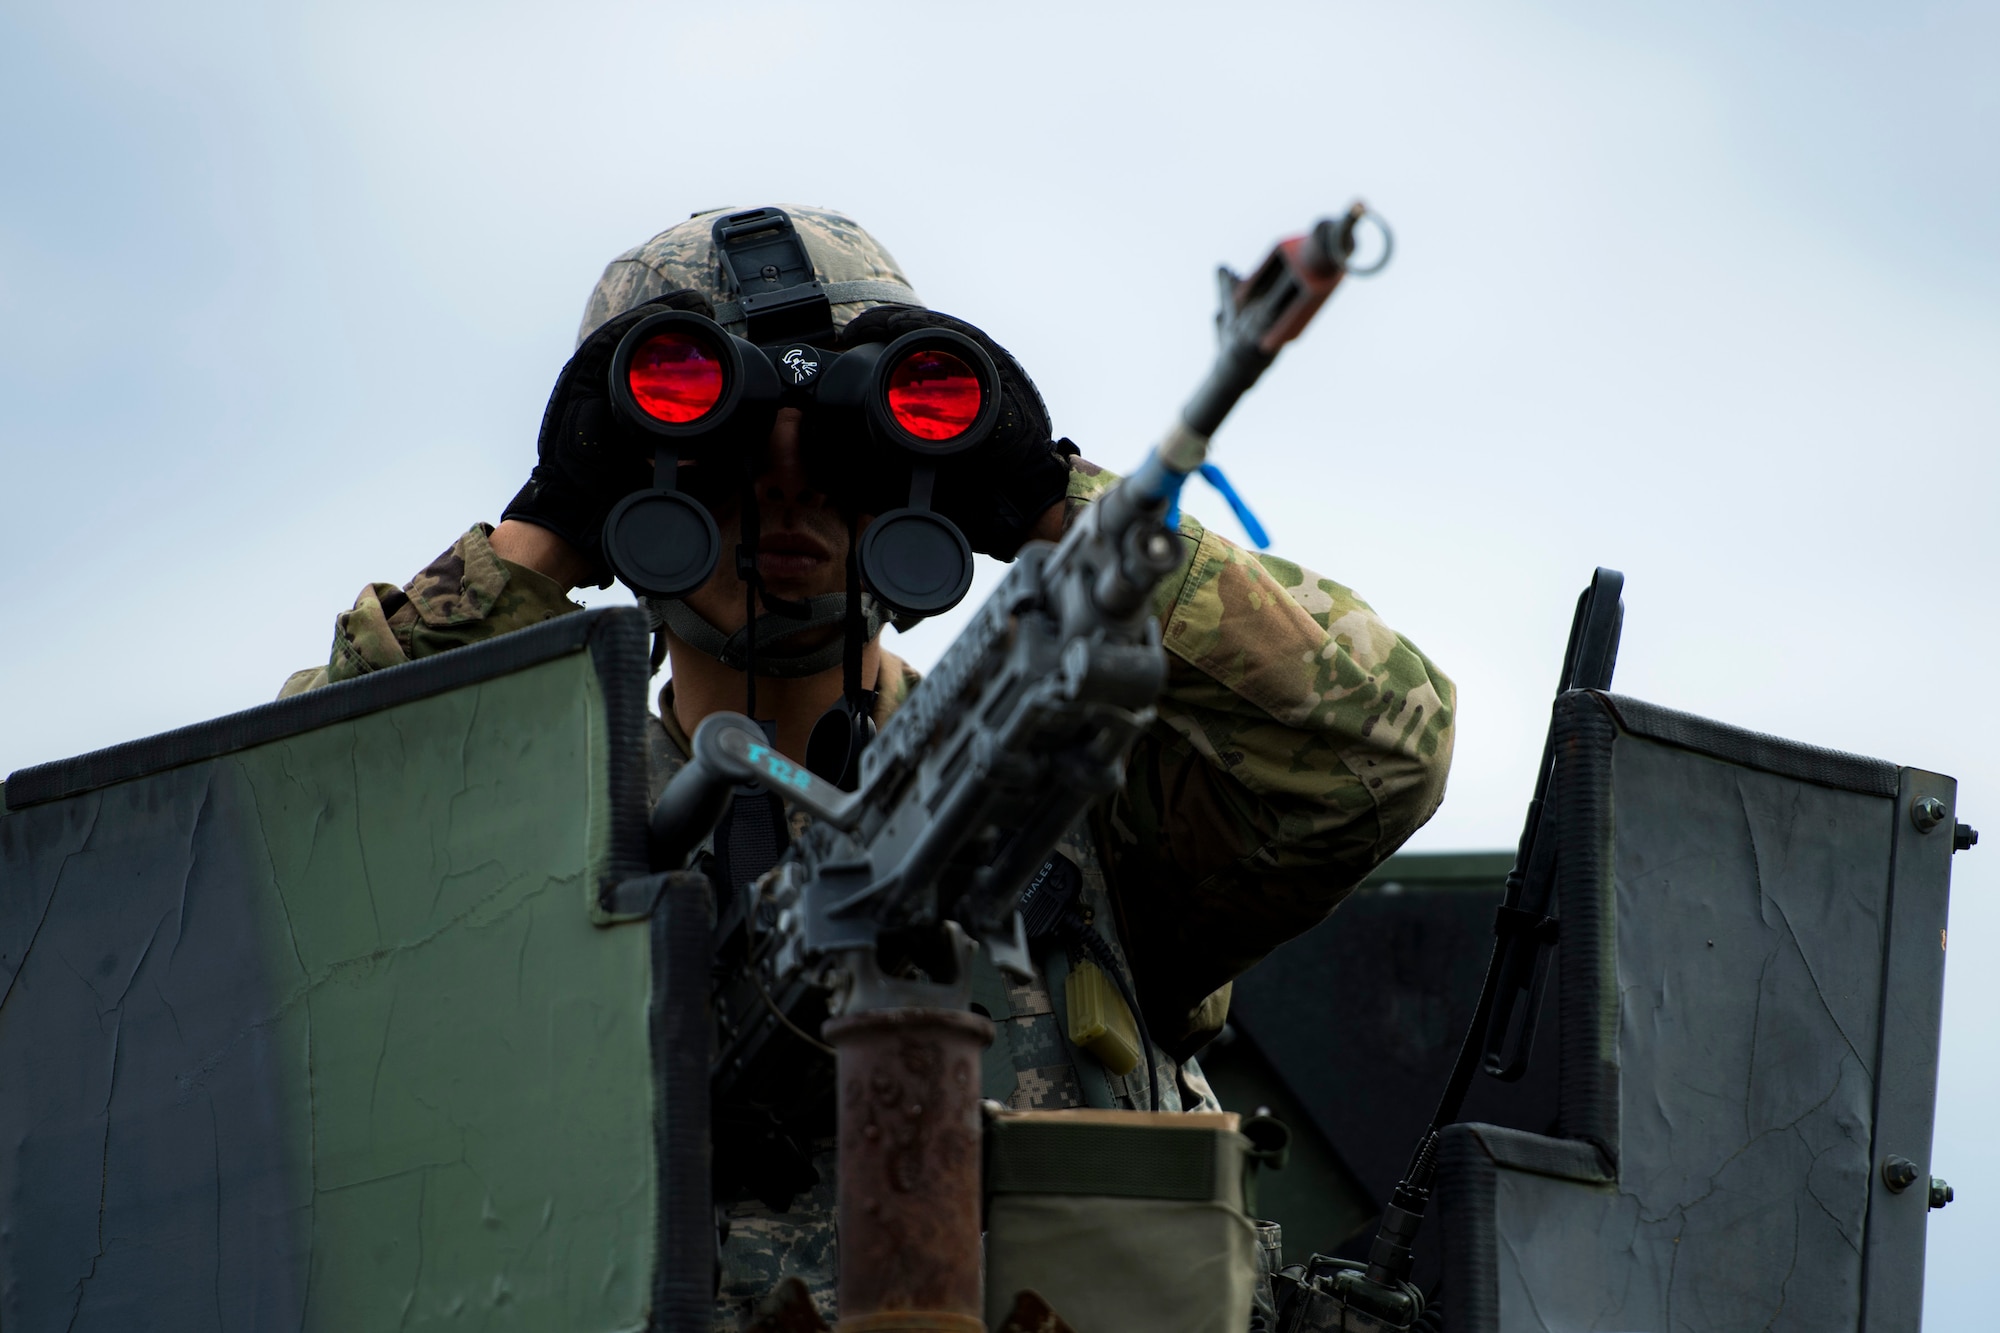 Airman 1st Class Chun Ko, 105th Base Defense Squadron fireteam member, looks into a nearby village to ensure there are no hostile villagers preparing to ambush is team during a Mission Readiness Exercise, March 8, 2017, at Avon Park Air Force Range, Fla. Airmen from the 105th BDS embedded into the 822d Base Defense Squadron to participate in the exercise. While the 822d BDS used the exercise to validate their training and regain their status as a Global Response Force, the 105th BDS received training that allowed them to show their capabilities and strengthened the bond between the two squadrons. (U.S. Air Force Photo by Airman 1st Class Janiqua P. Robinson)